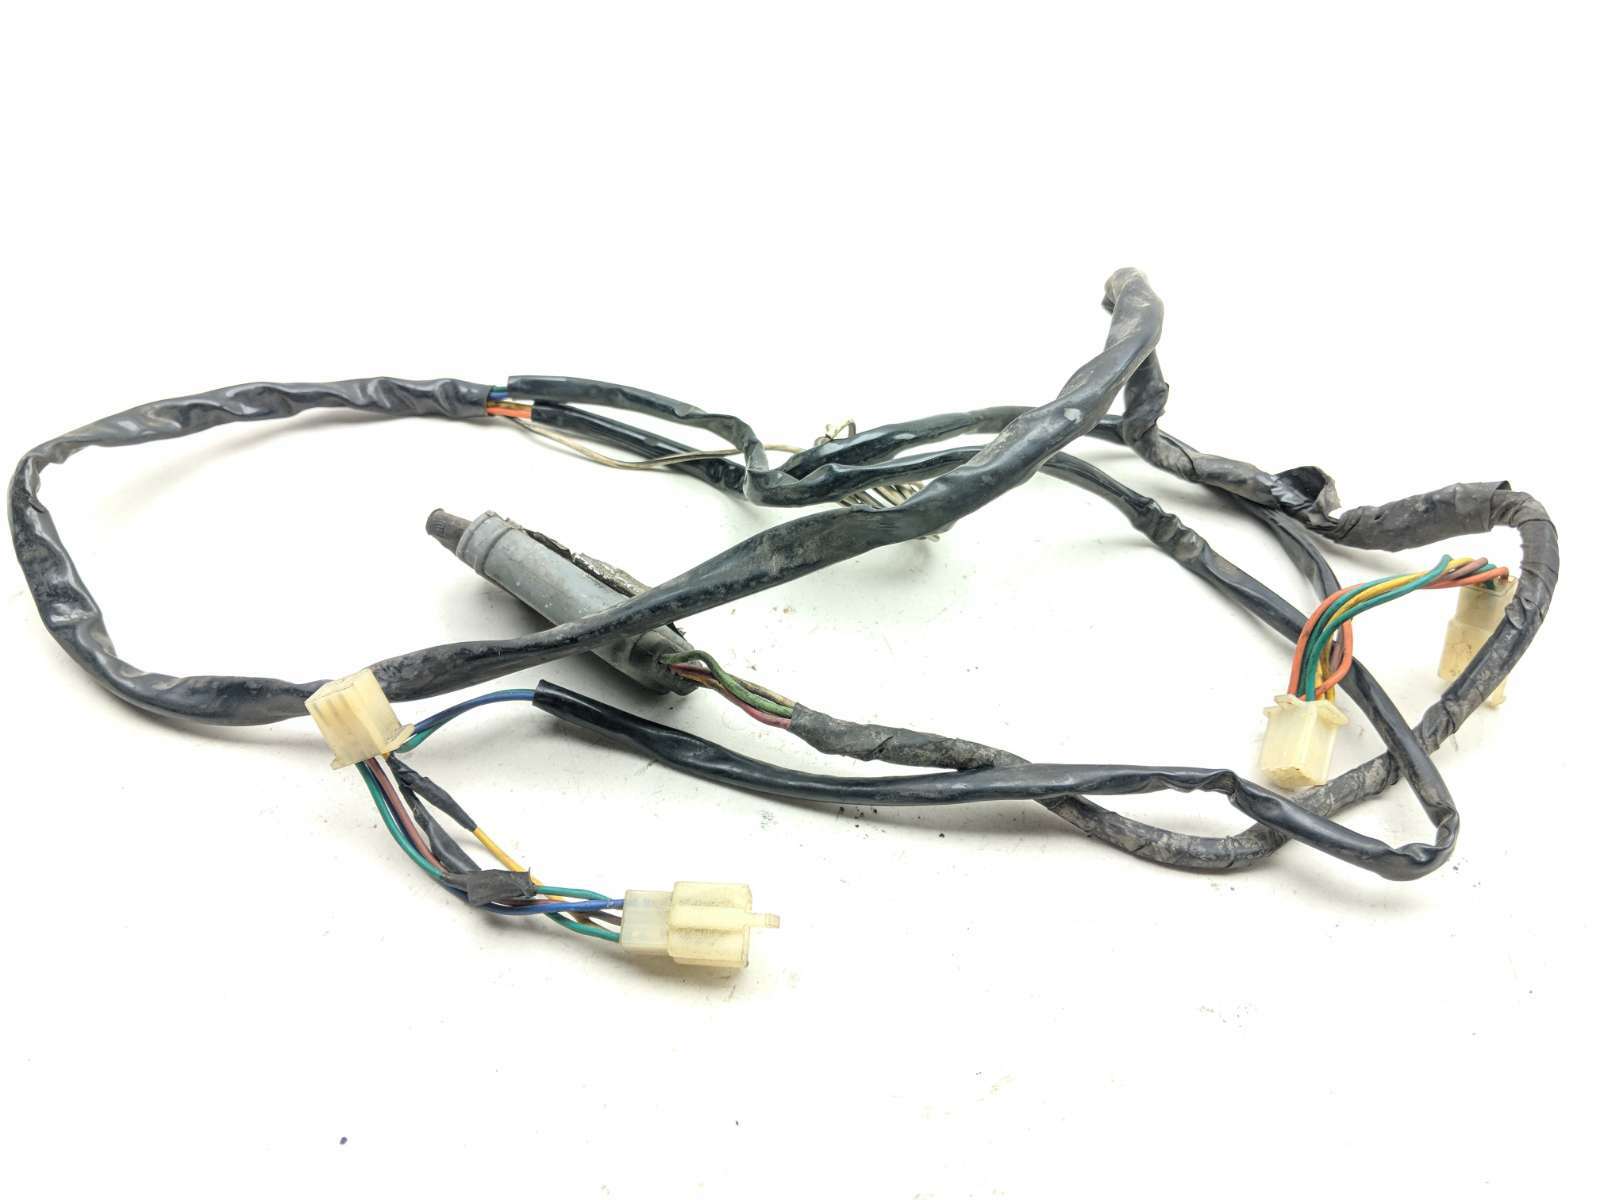 93 Honda GL1500 Goldwing Ignition Coil Wire Wiring Harness